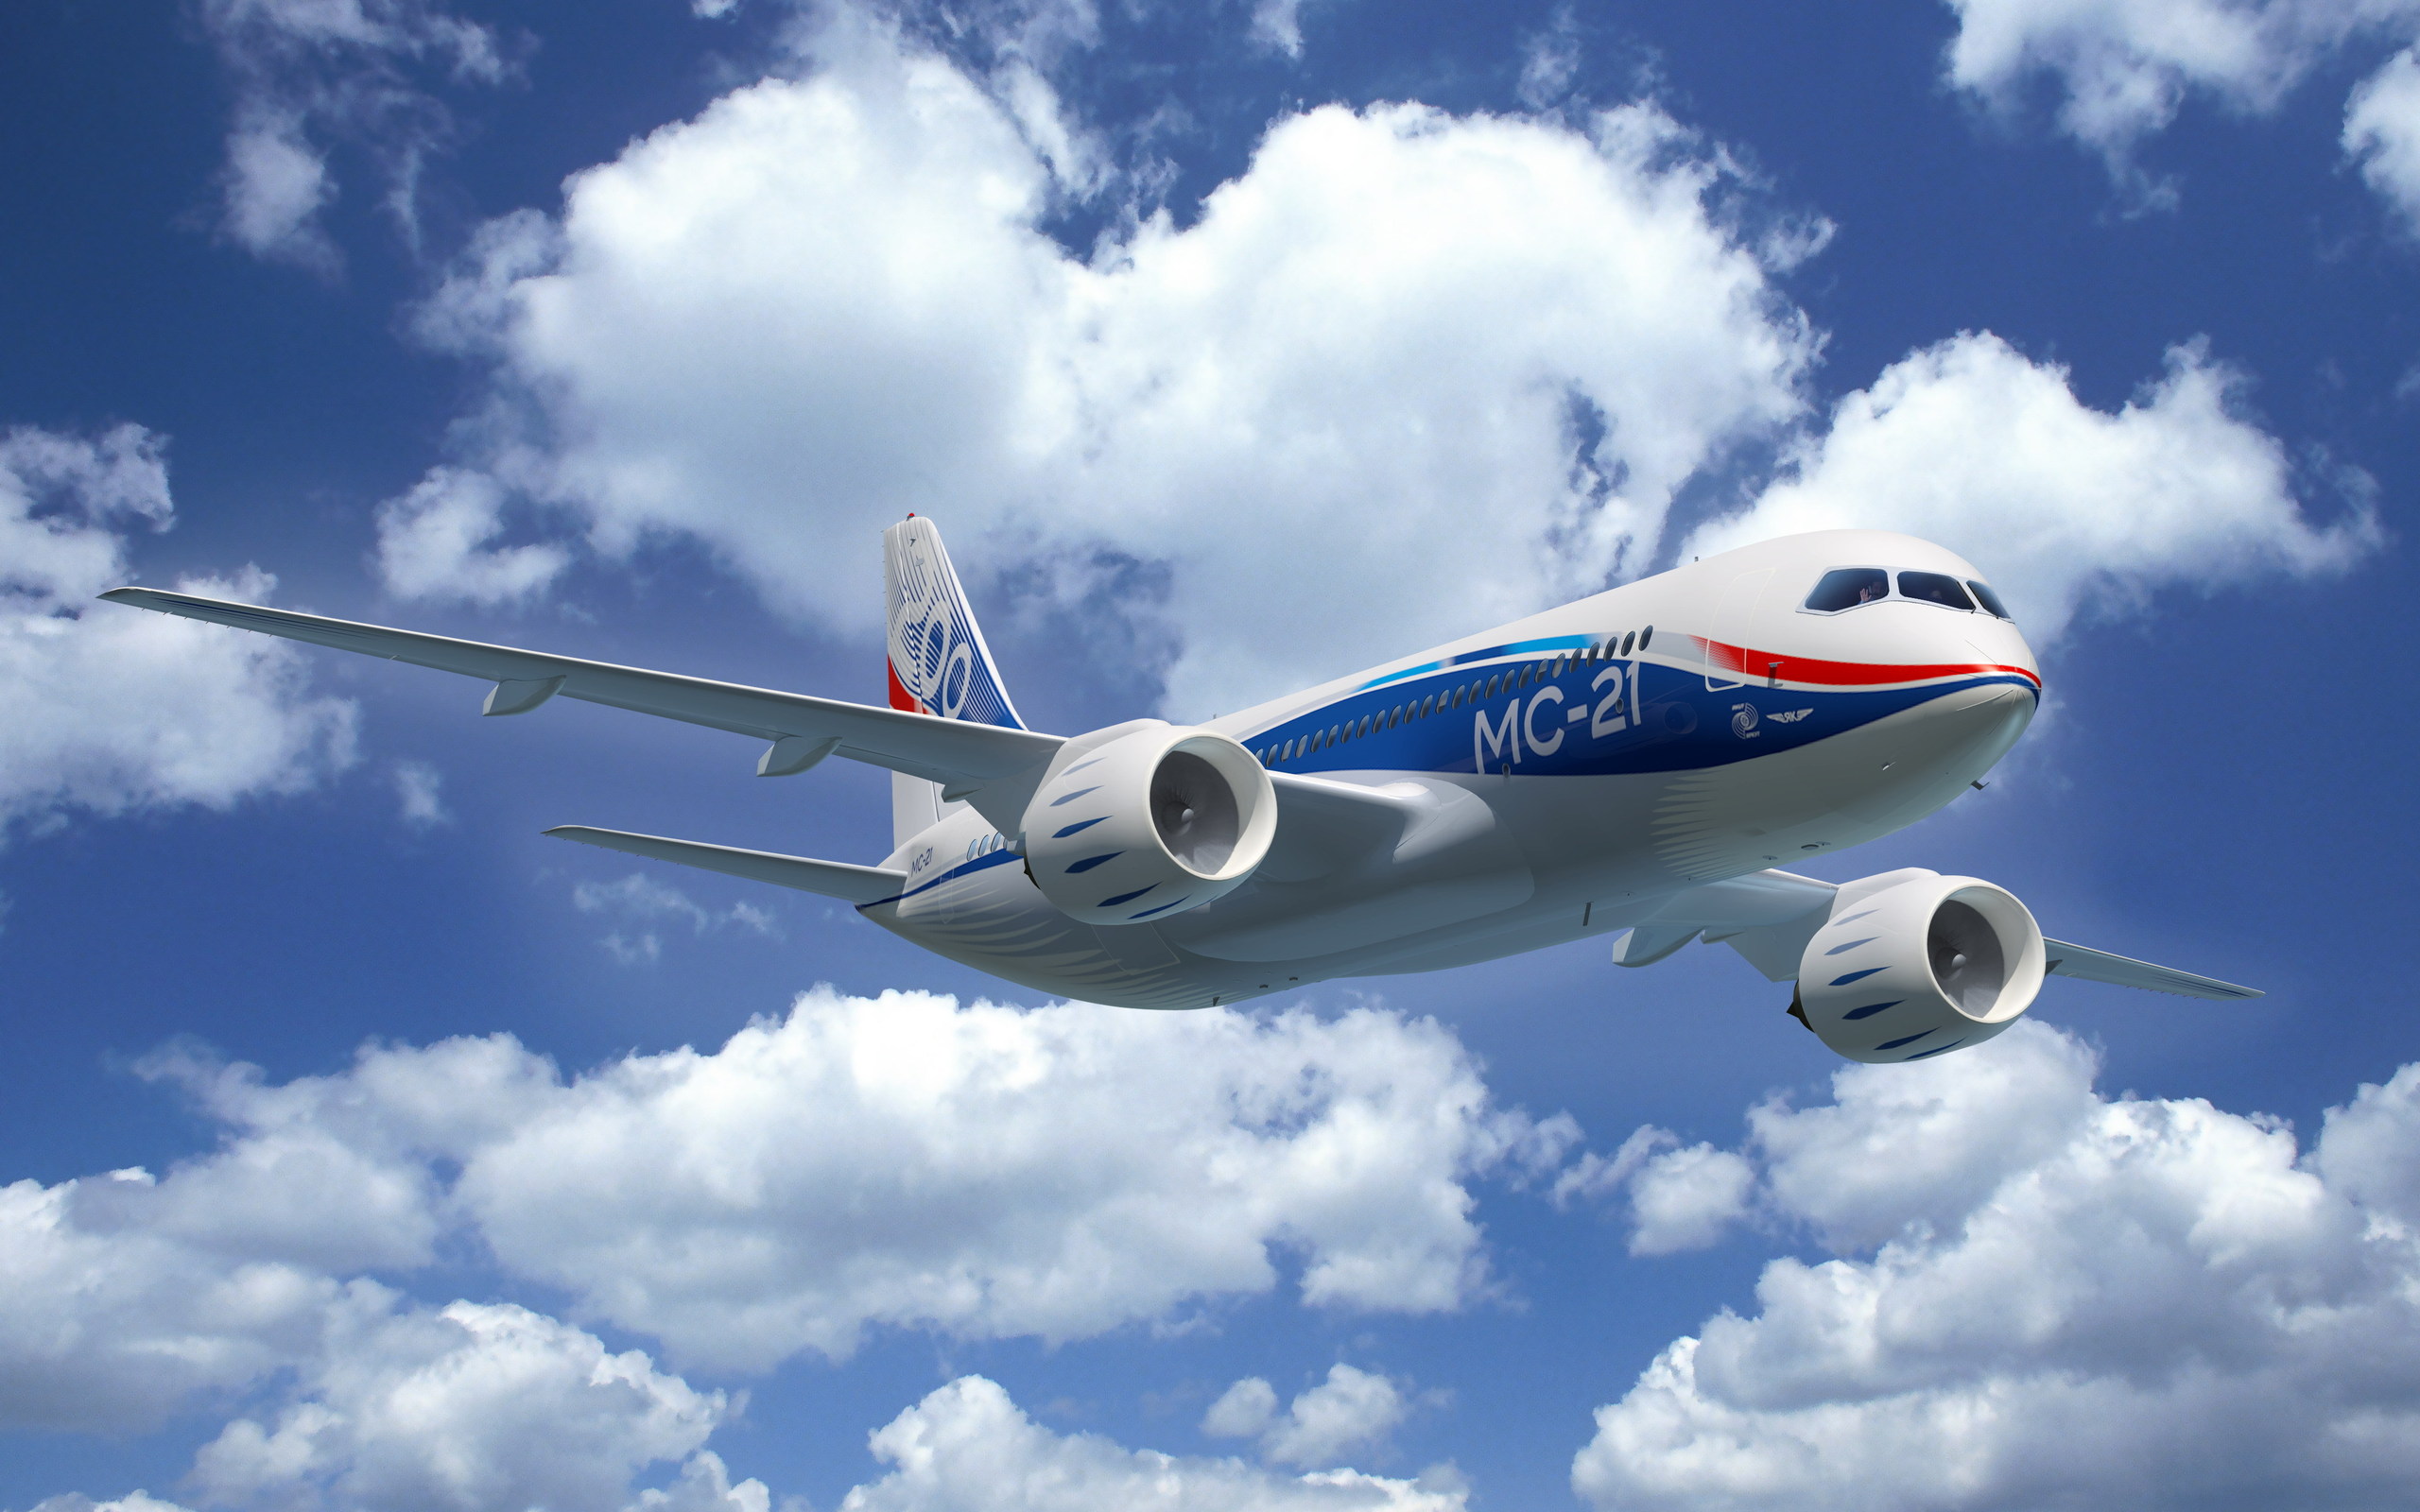 Wallpapers ms-21 airplane Boeing on the desktop